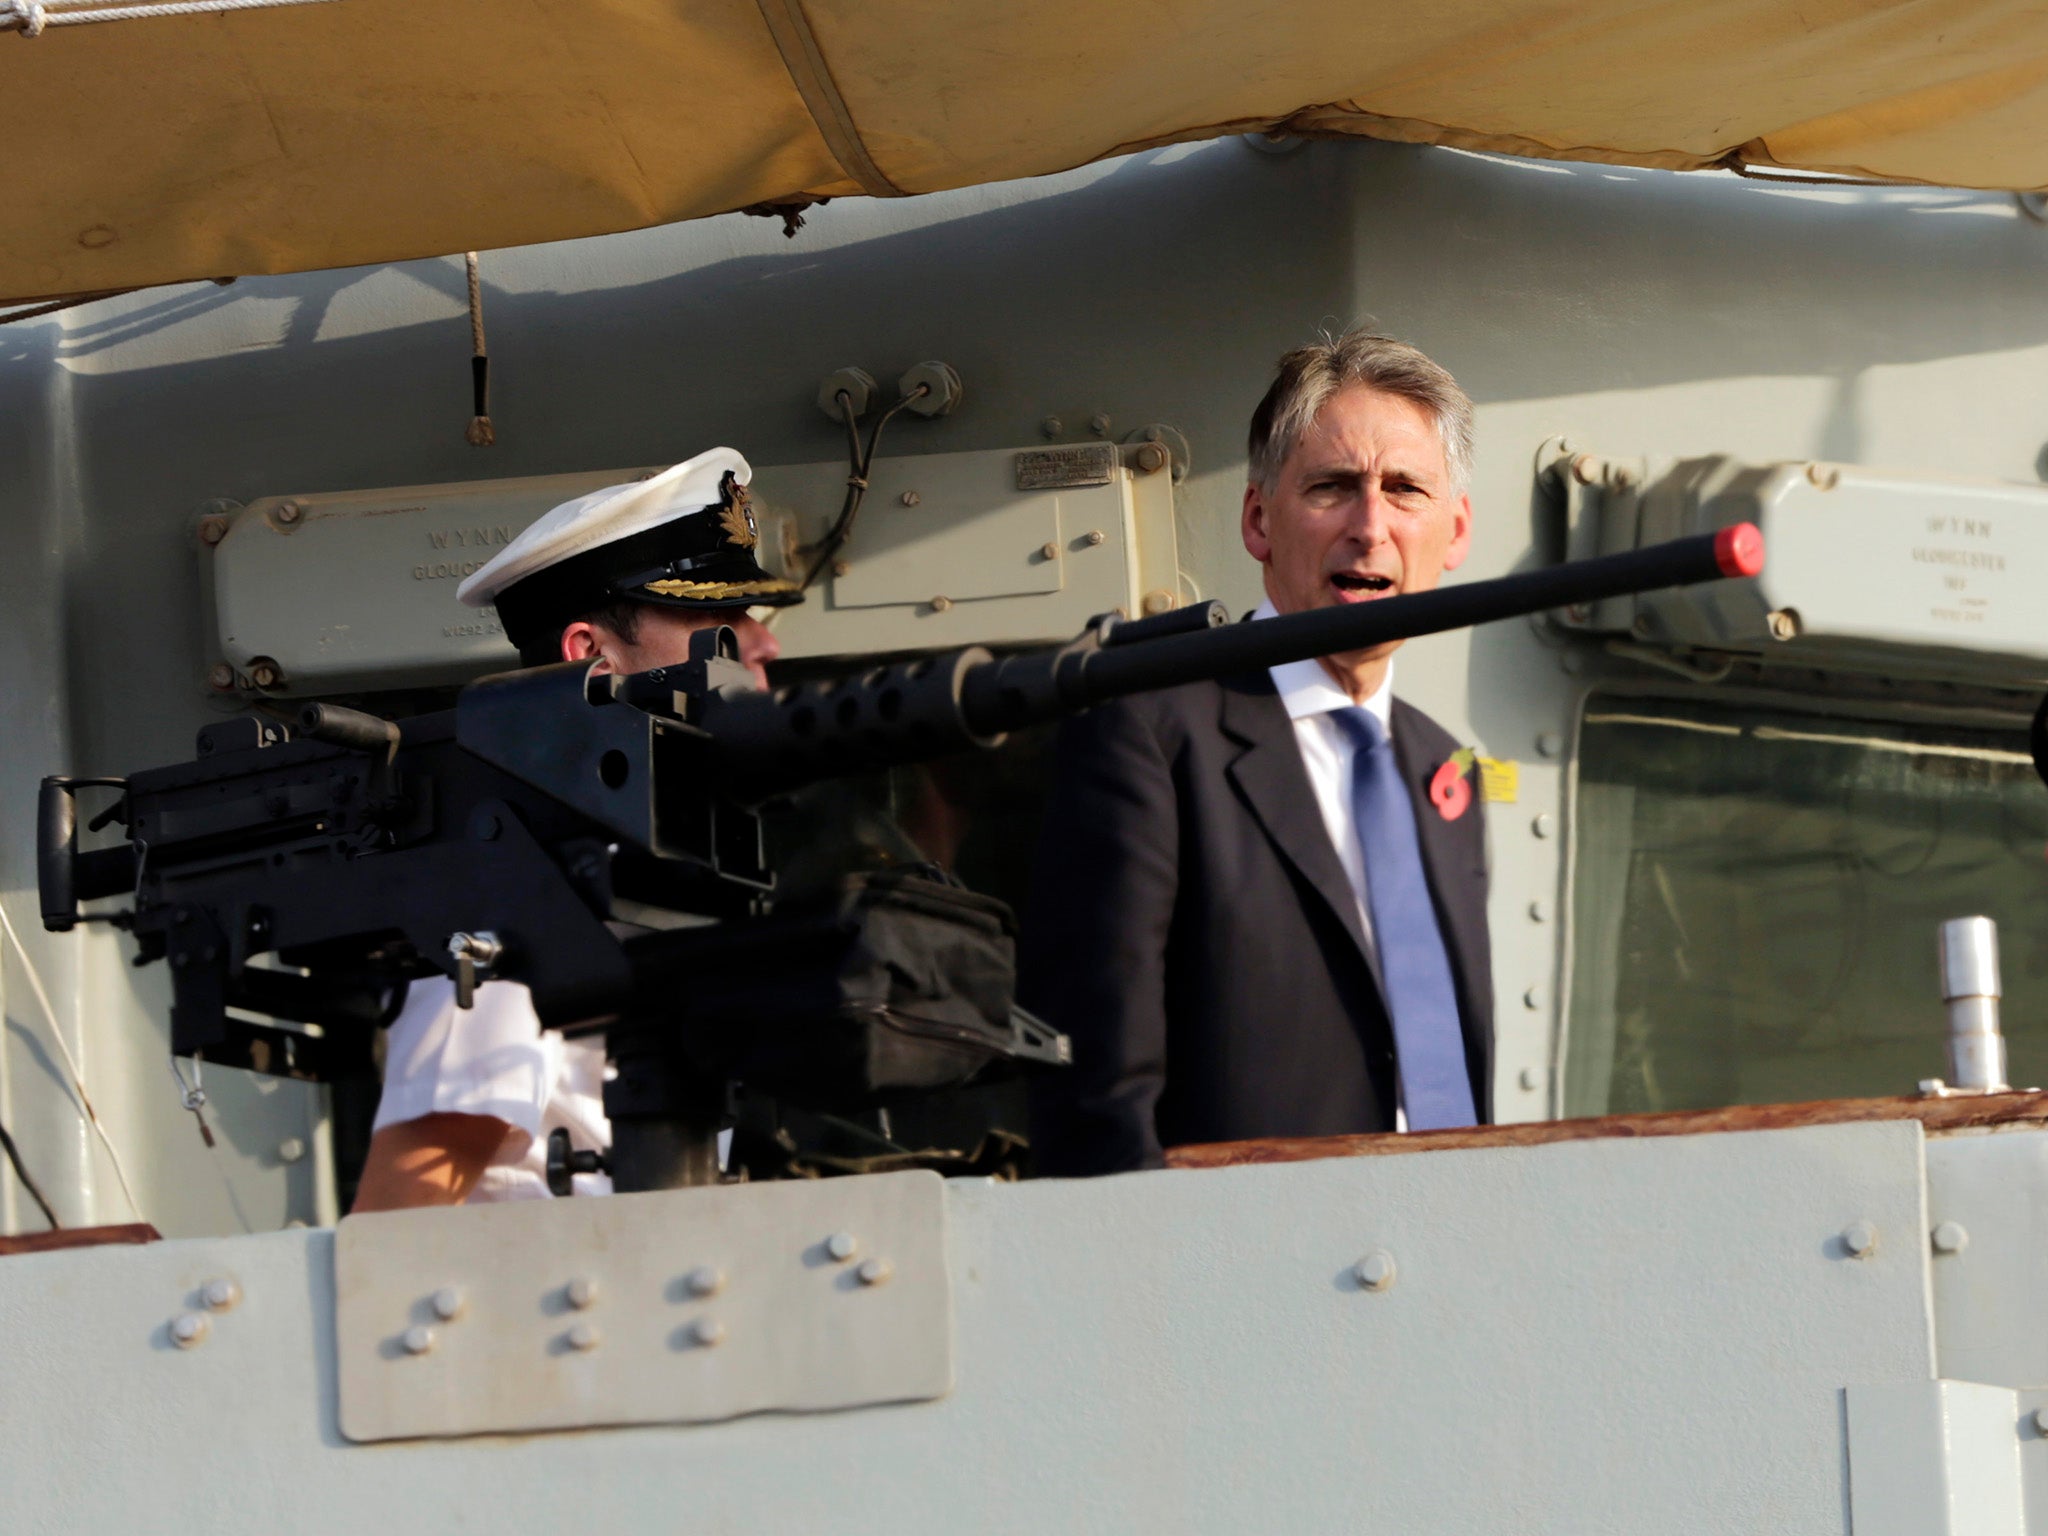 British Foreign Secretary Philip Hammond boards a British military ship docked in Manama, Bahrain after helping lay a cornerstone for a new British military base being built in Bahrain.